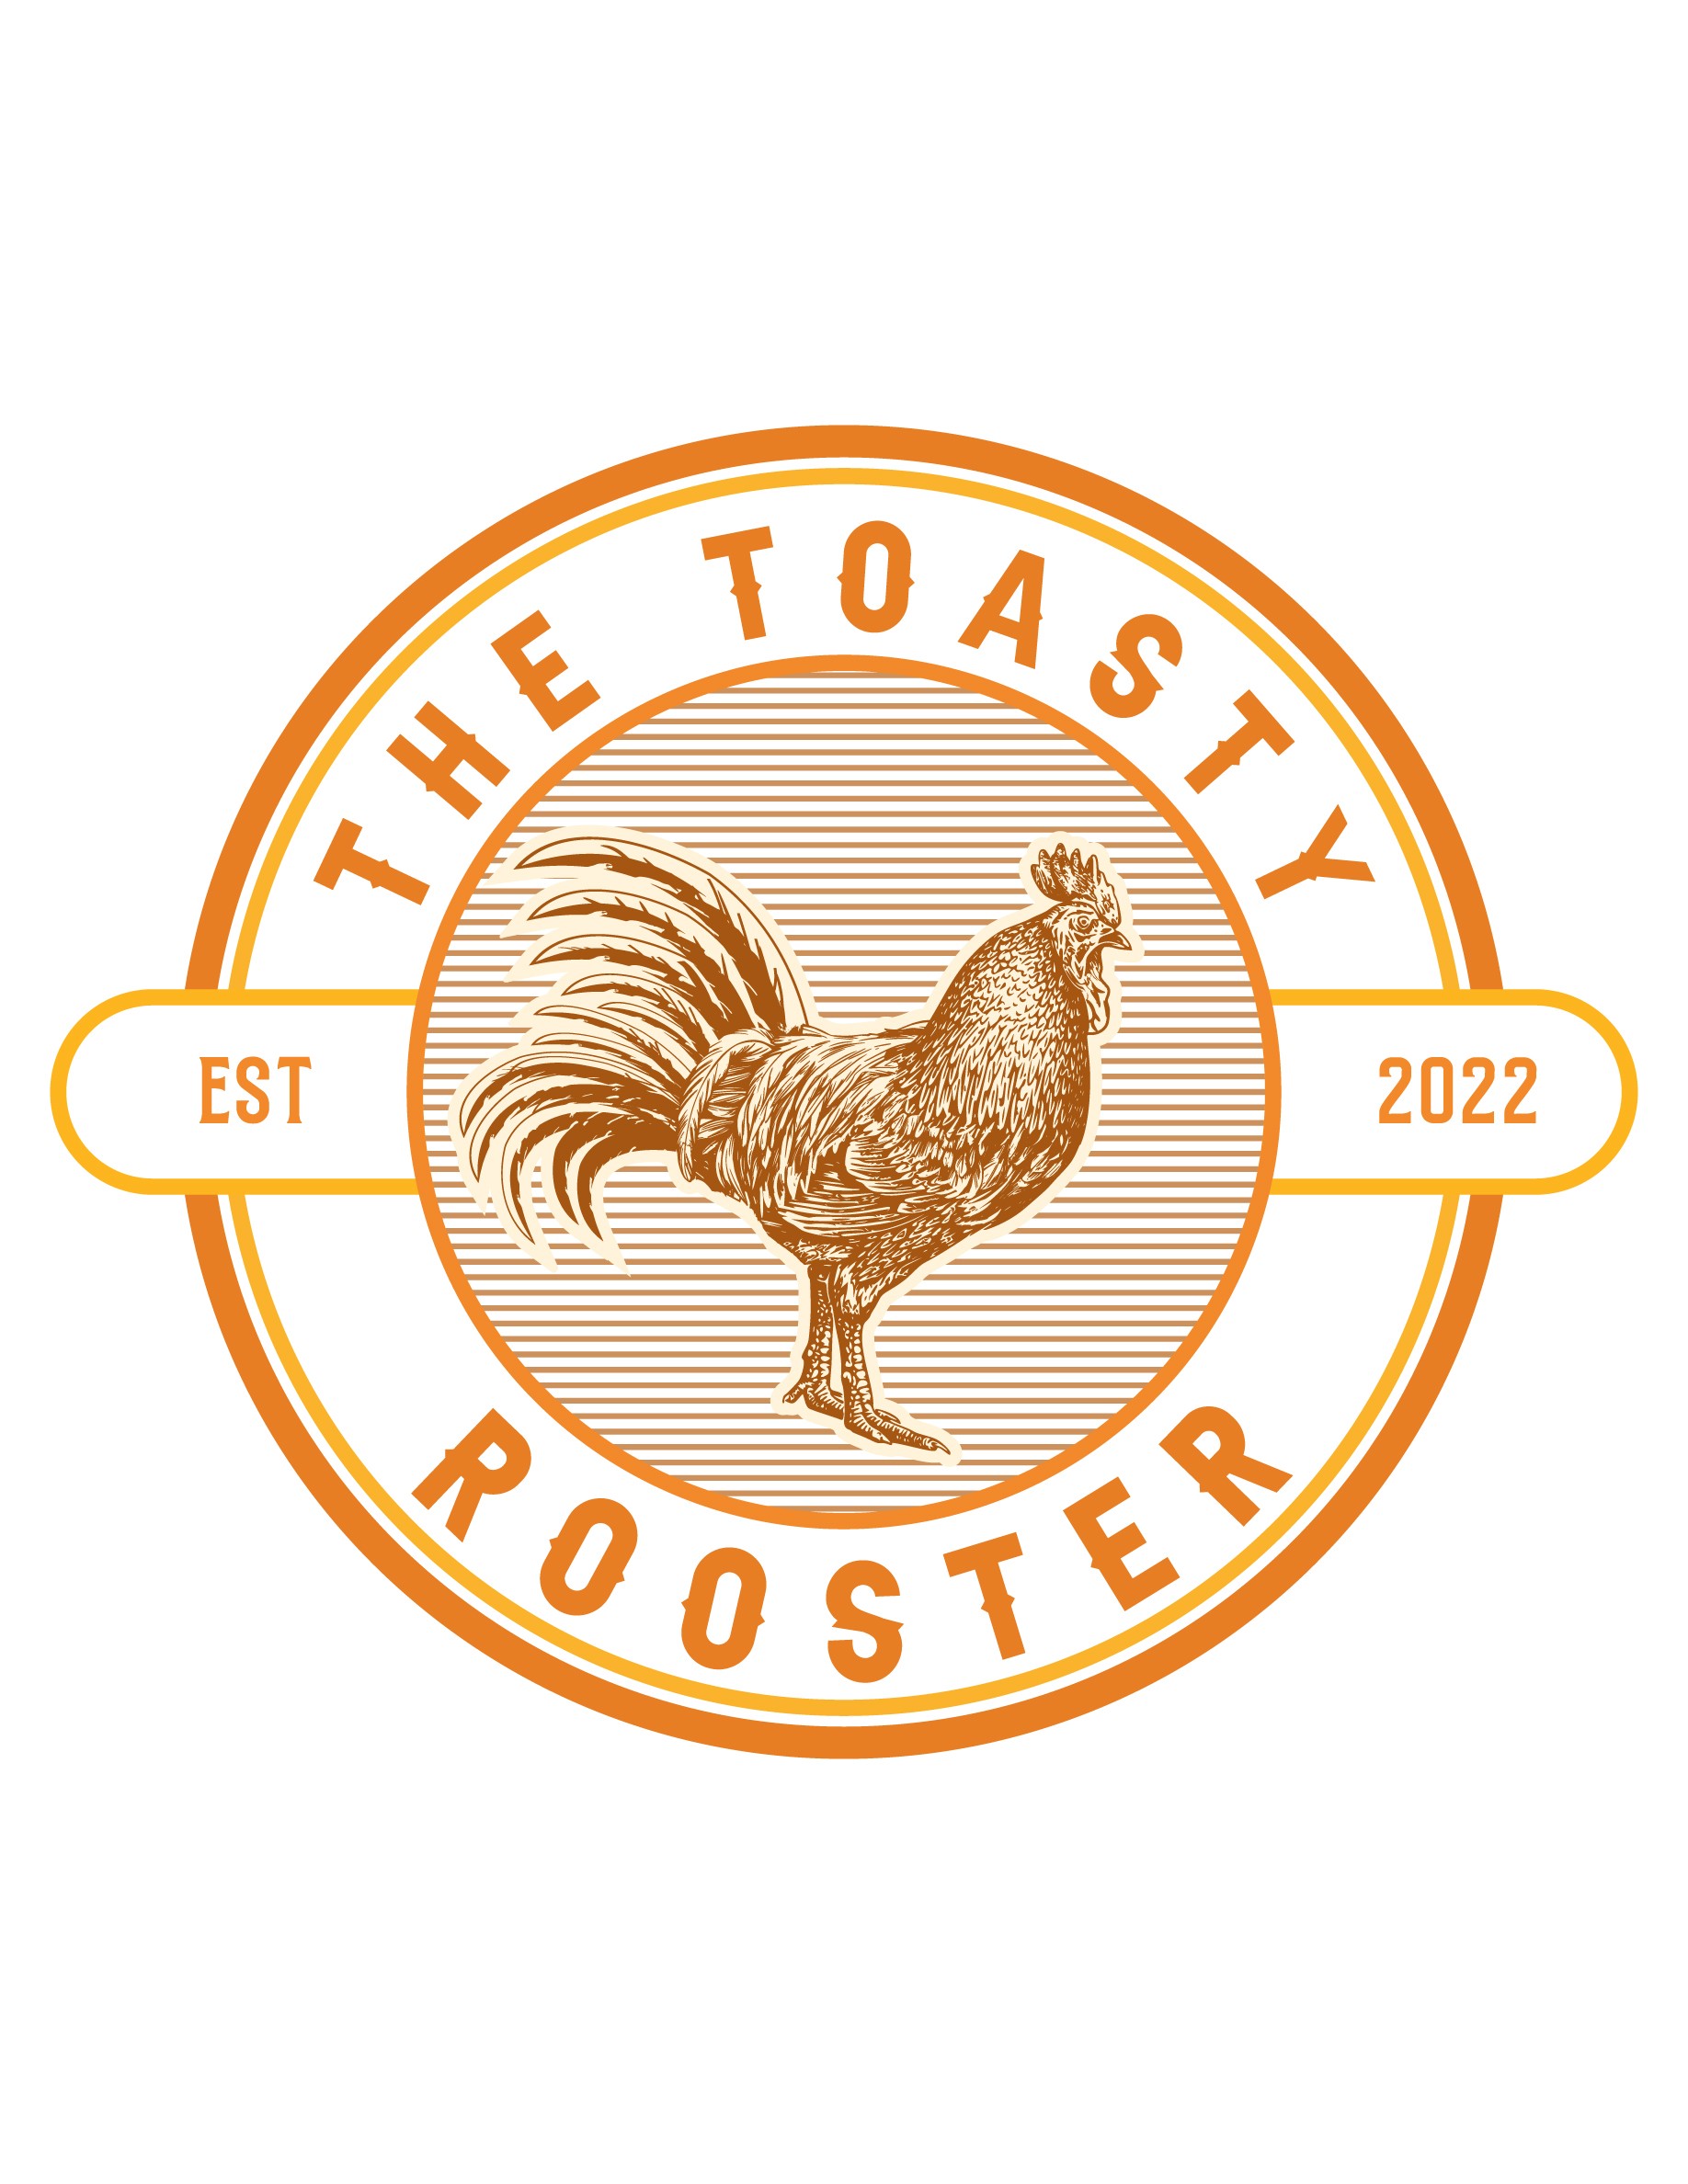 The Toasty Rooster 2812 S. Marion Ave. Lake City, FL